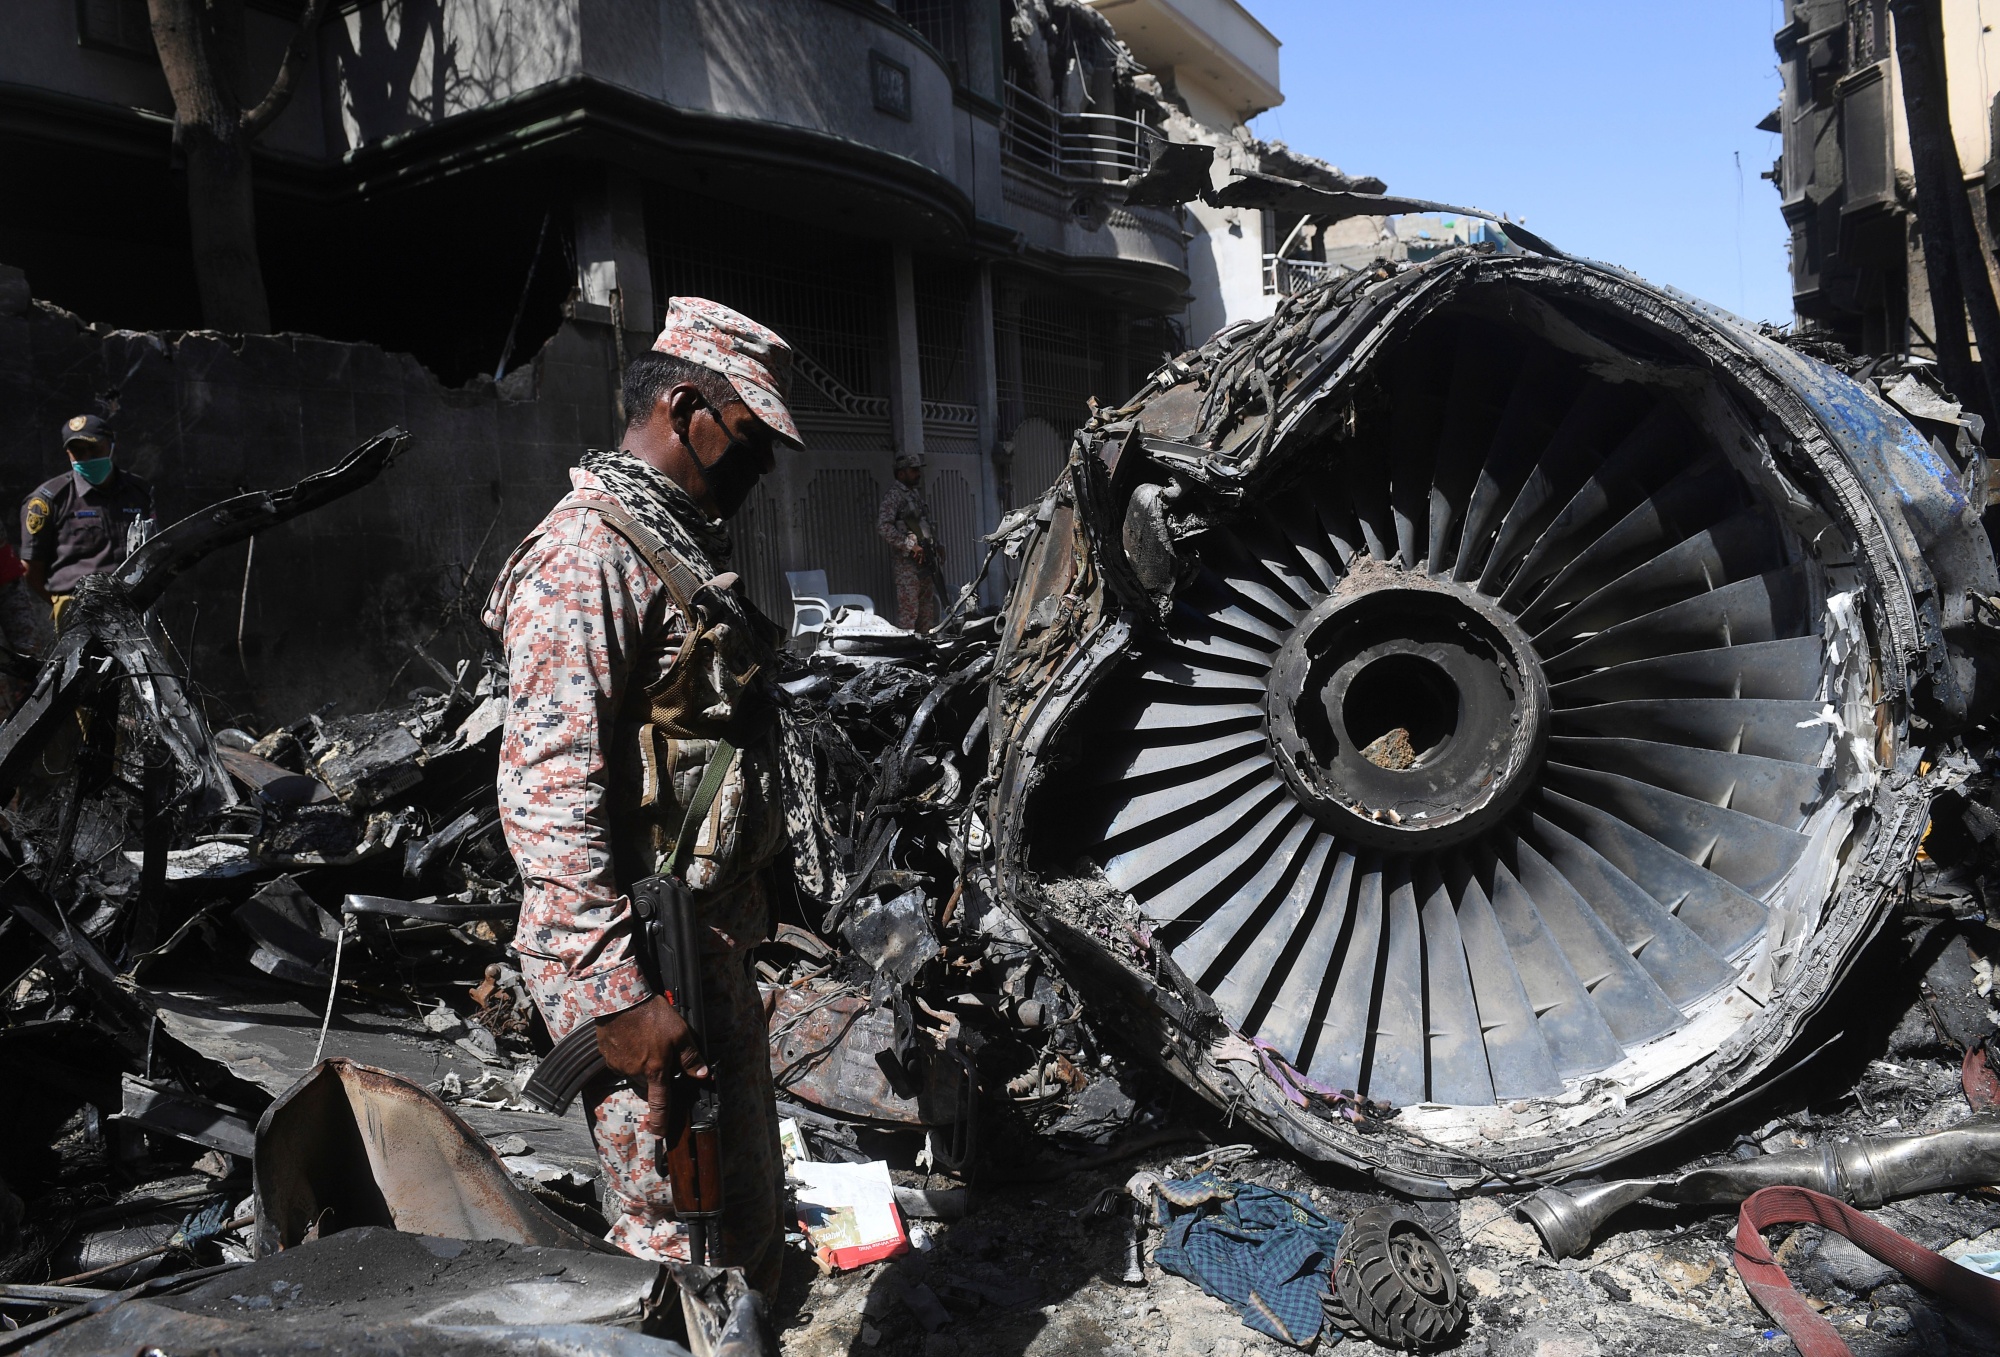 The crash site of the Pakistan International Airlines aircraft that went down in Karachi on May 24.